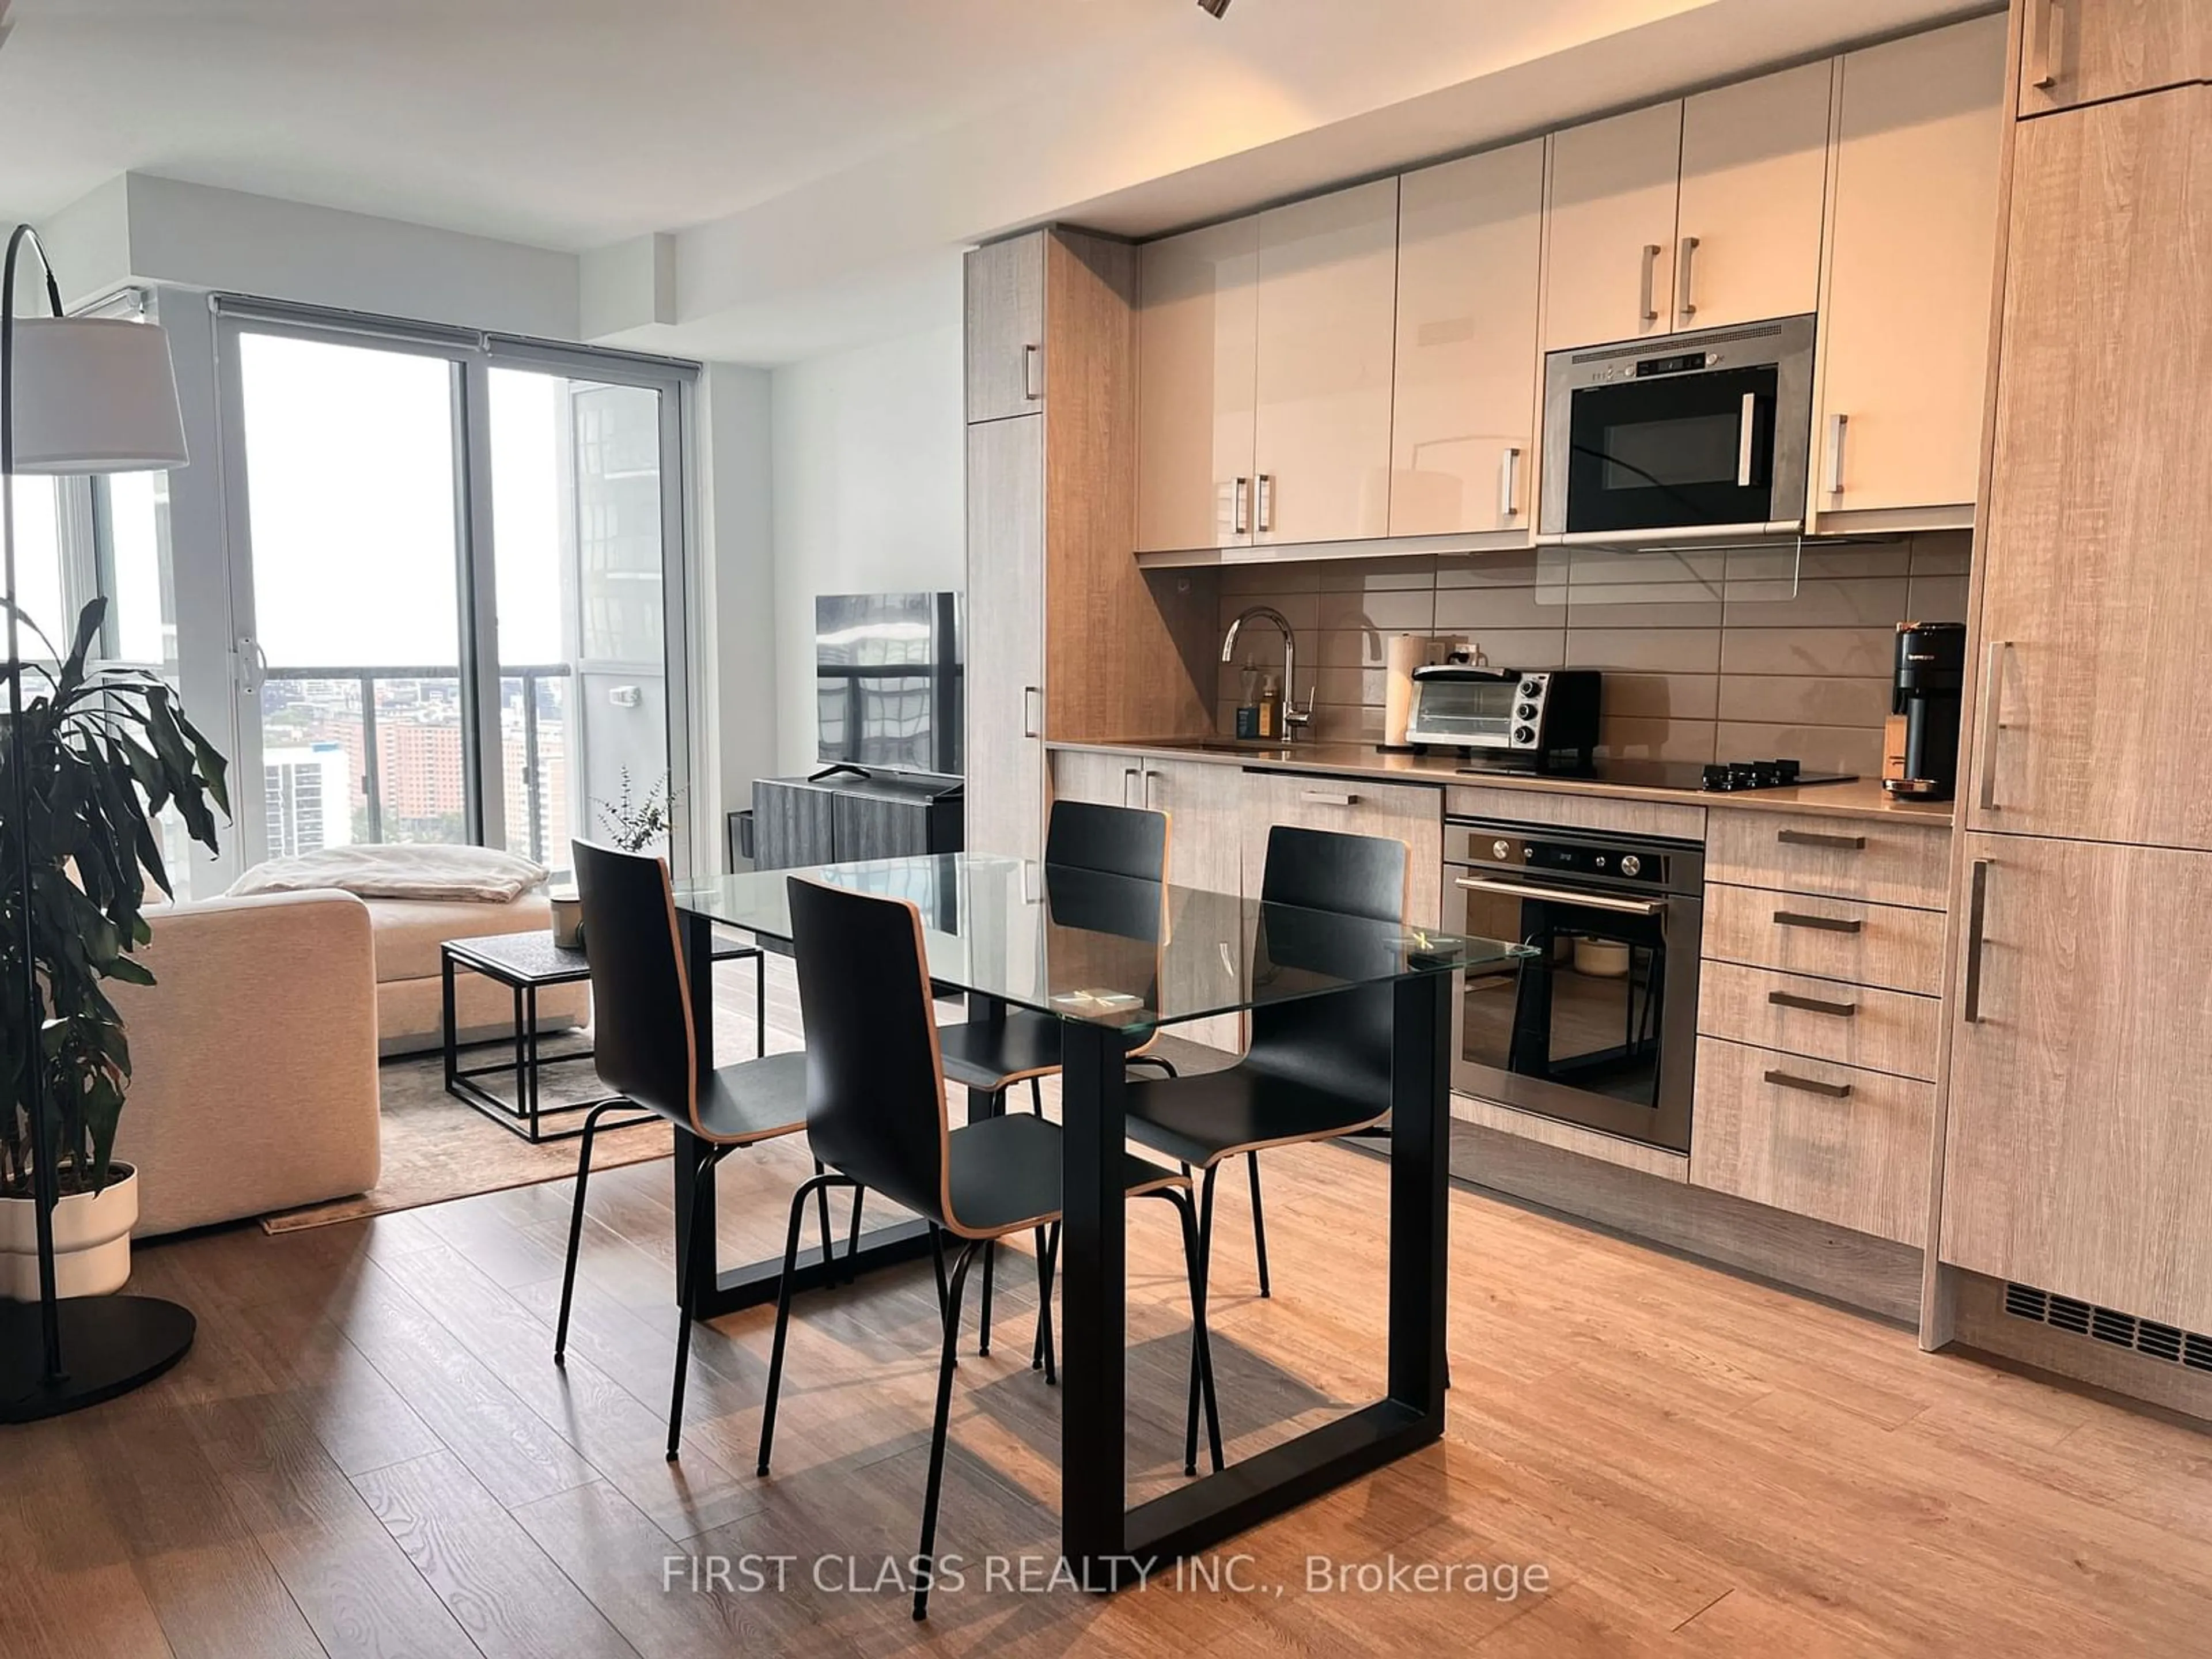 Contemporary kitchen for 77 Mutual St #2610, Toronto Ontario M5B 2A9